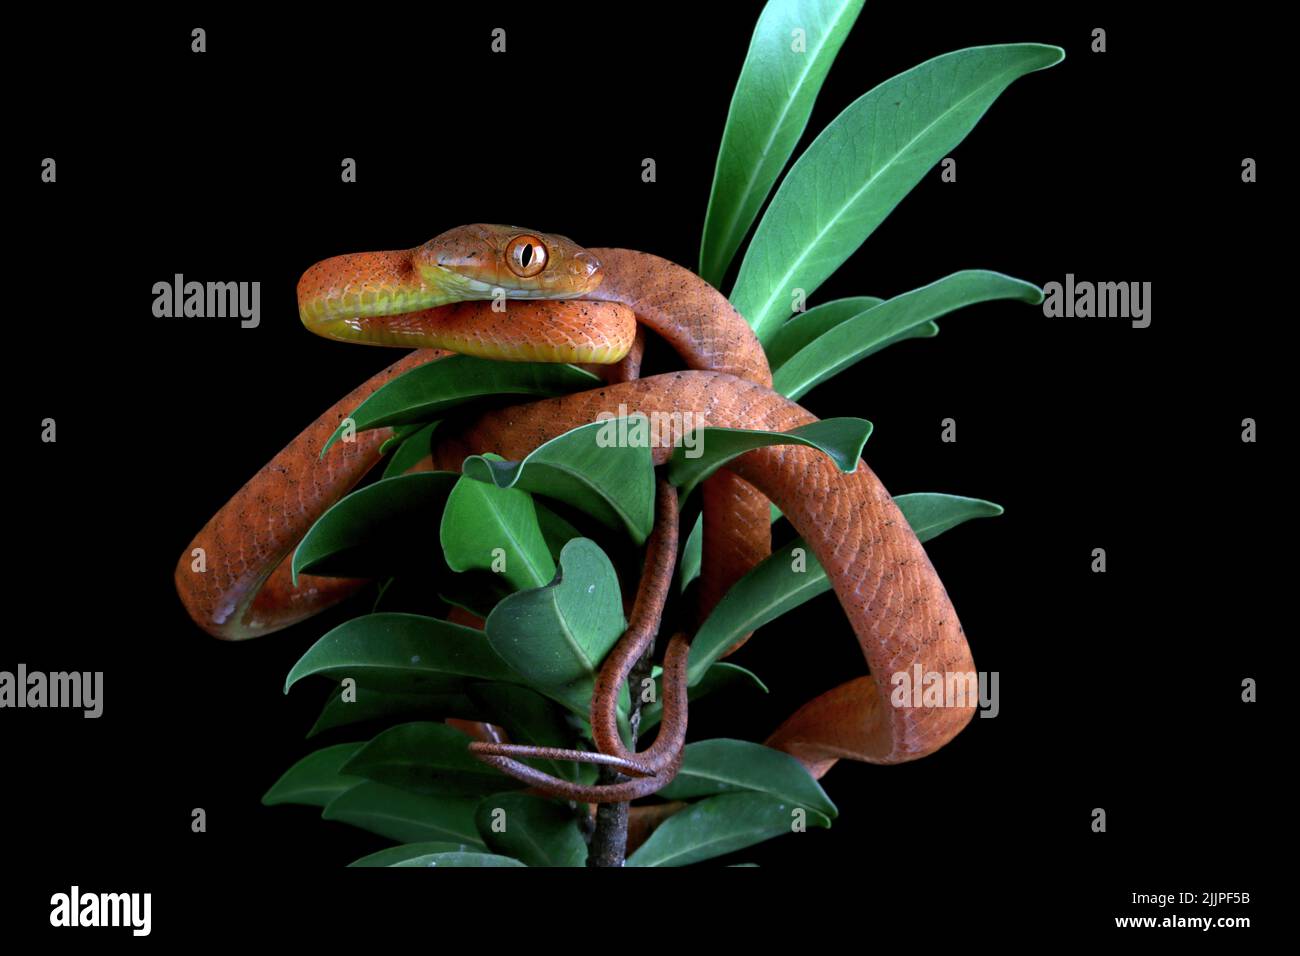 Close-up of a red boiga snake on a plant, Indonesia Stock Photo